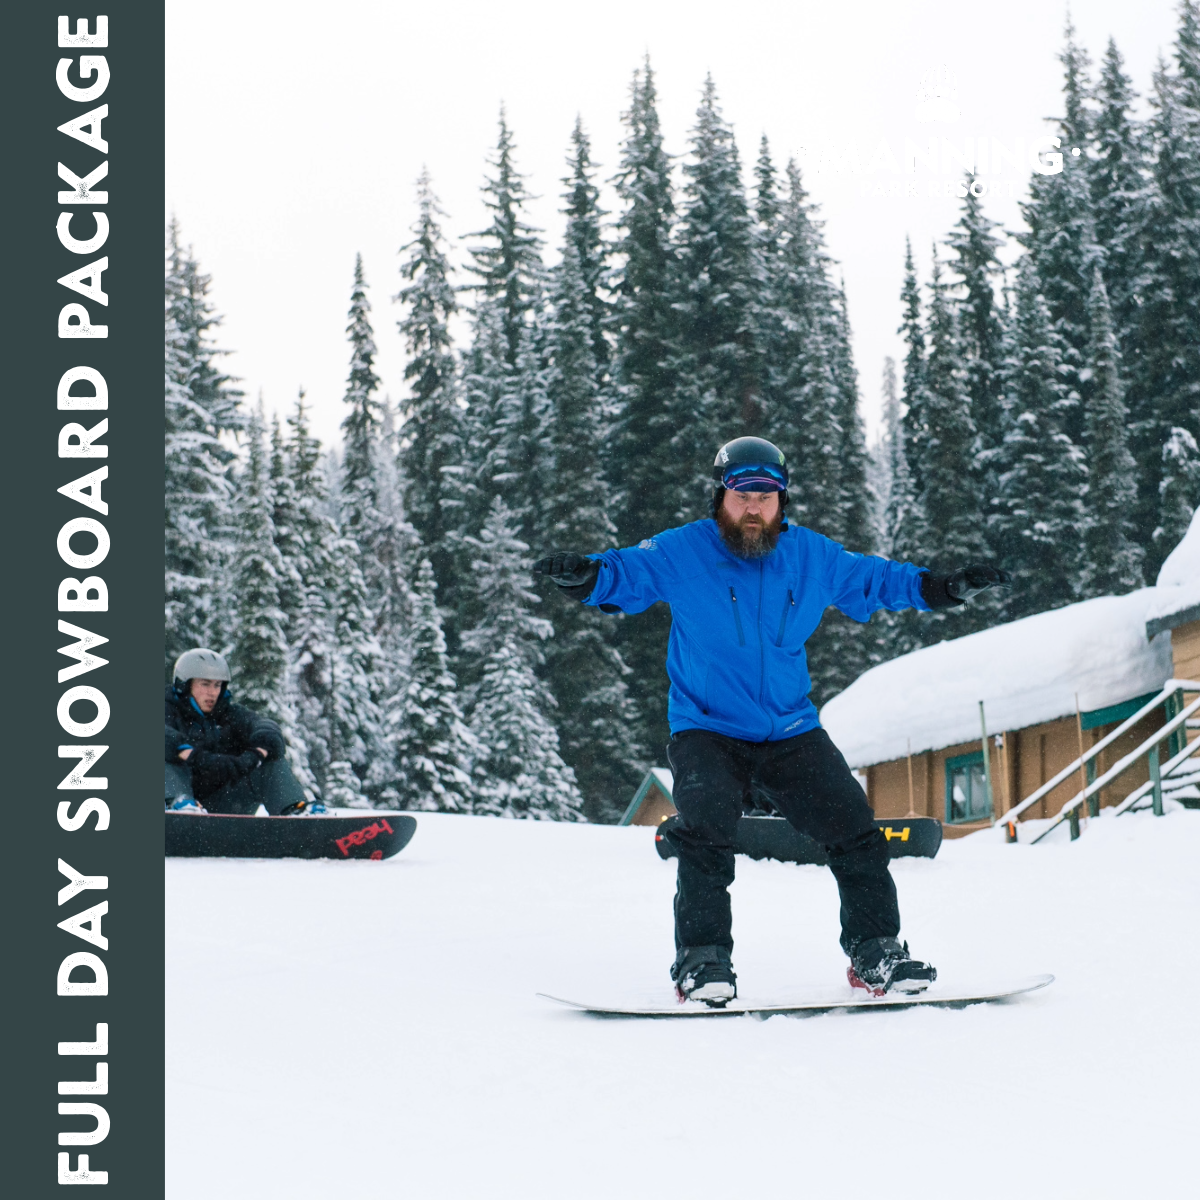 Full Day Snowboard Rental Package